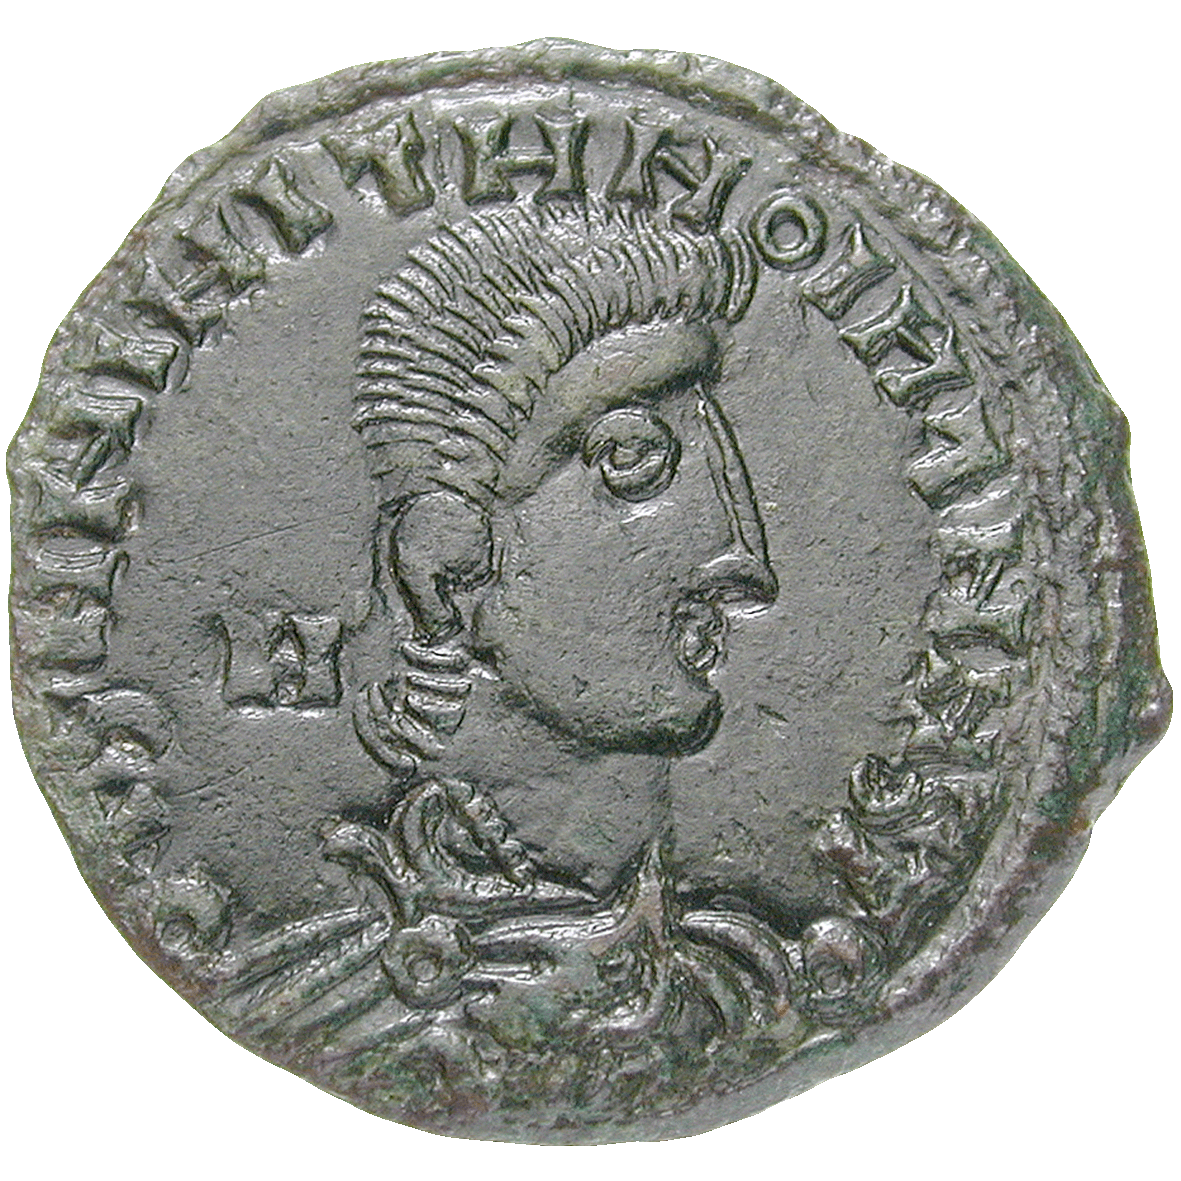 Roman Empire, Forged Solidus in the Name of Constantius II (obverse)